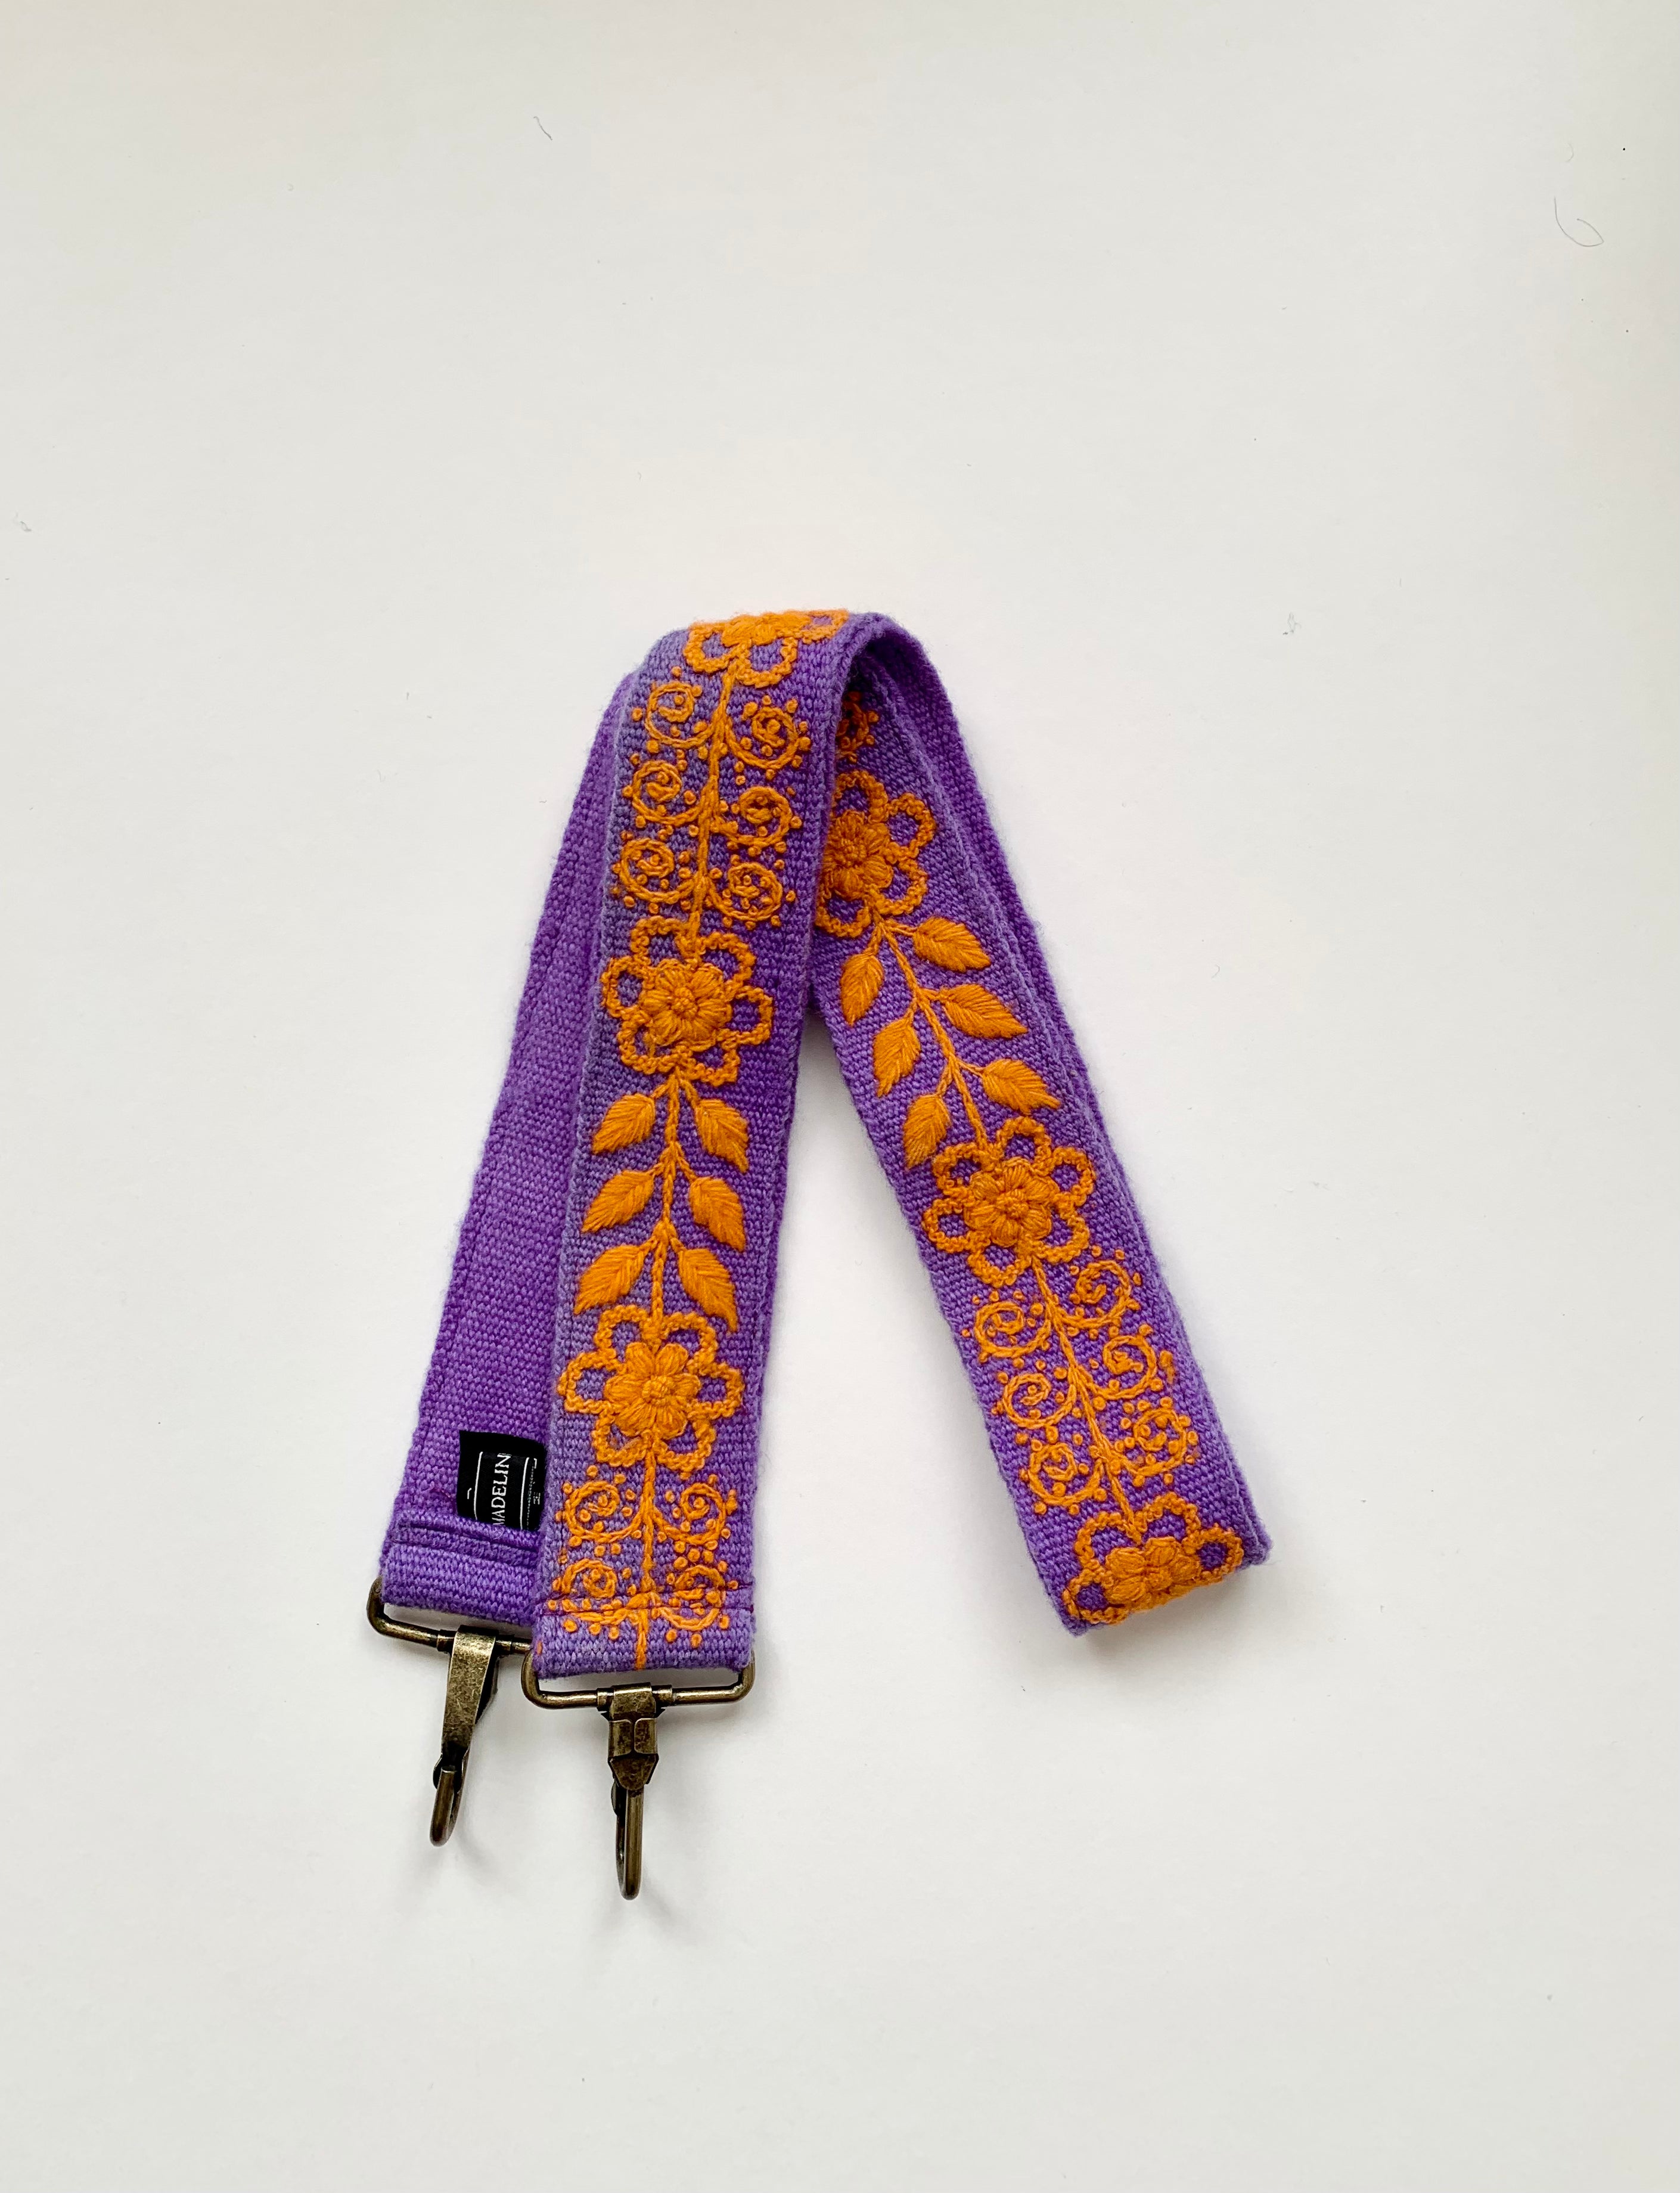 Katy Large Purse Strap: Hand-loomed wool fabric with purple backing and orange floral and leaves design, non-adjustable. Hand embroidered by Fair Trade artisans.